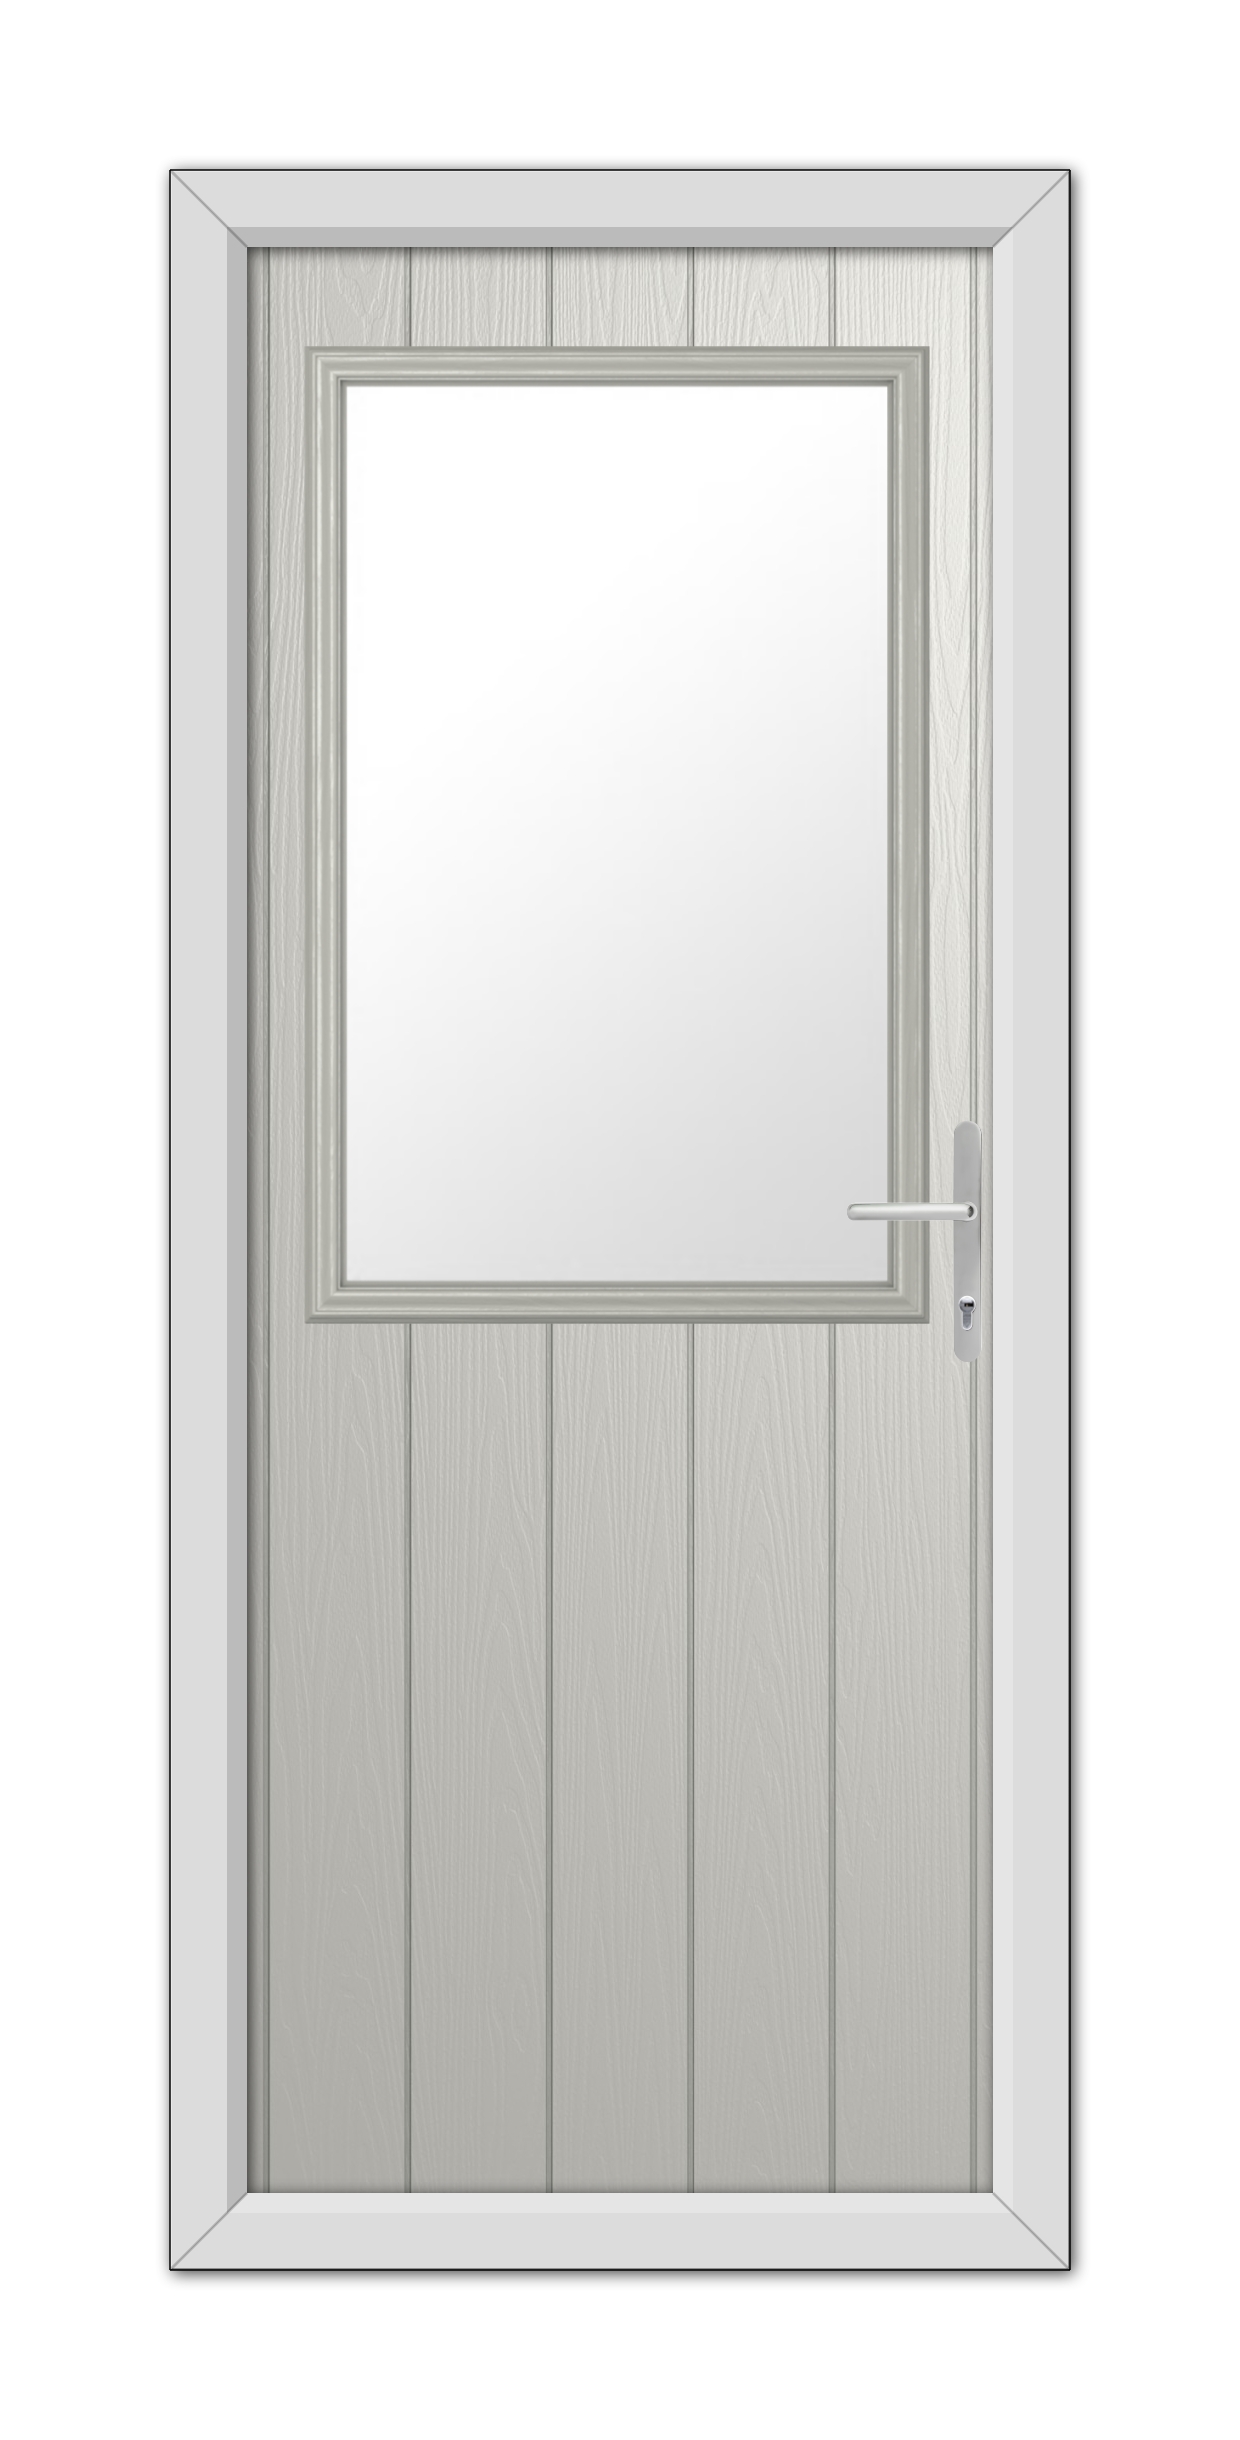 A Agate Grey Clifton Composite Door 48mm Timber Core with a large central glass panel and a metal handle, set within a simple frame.